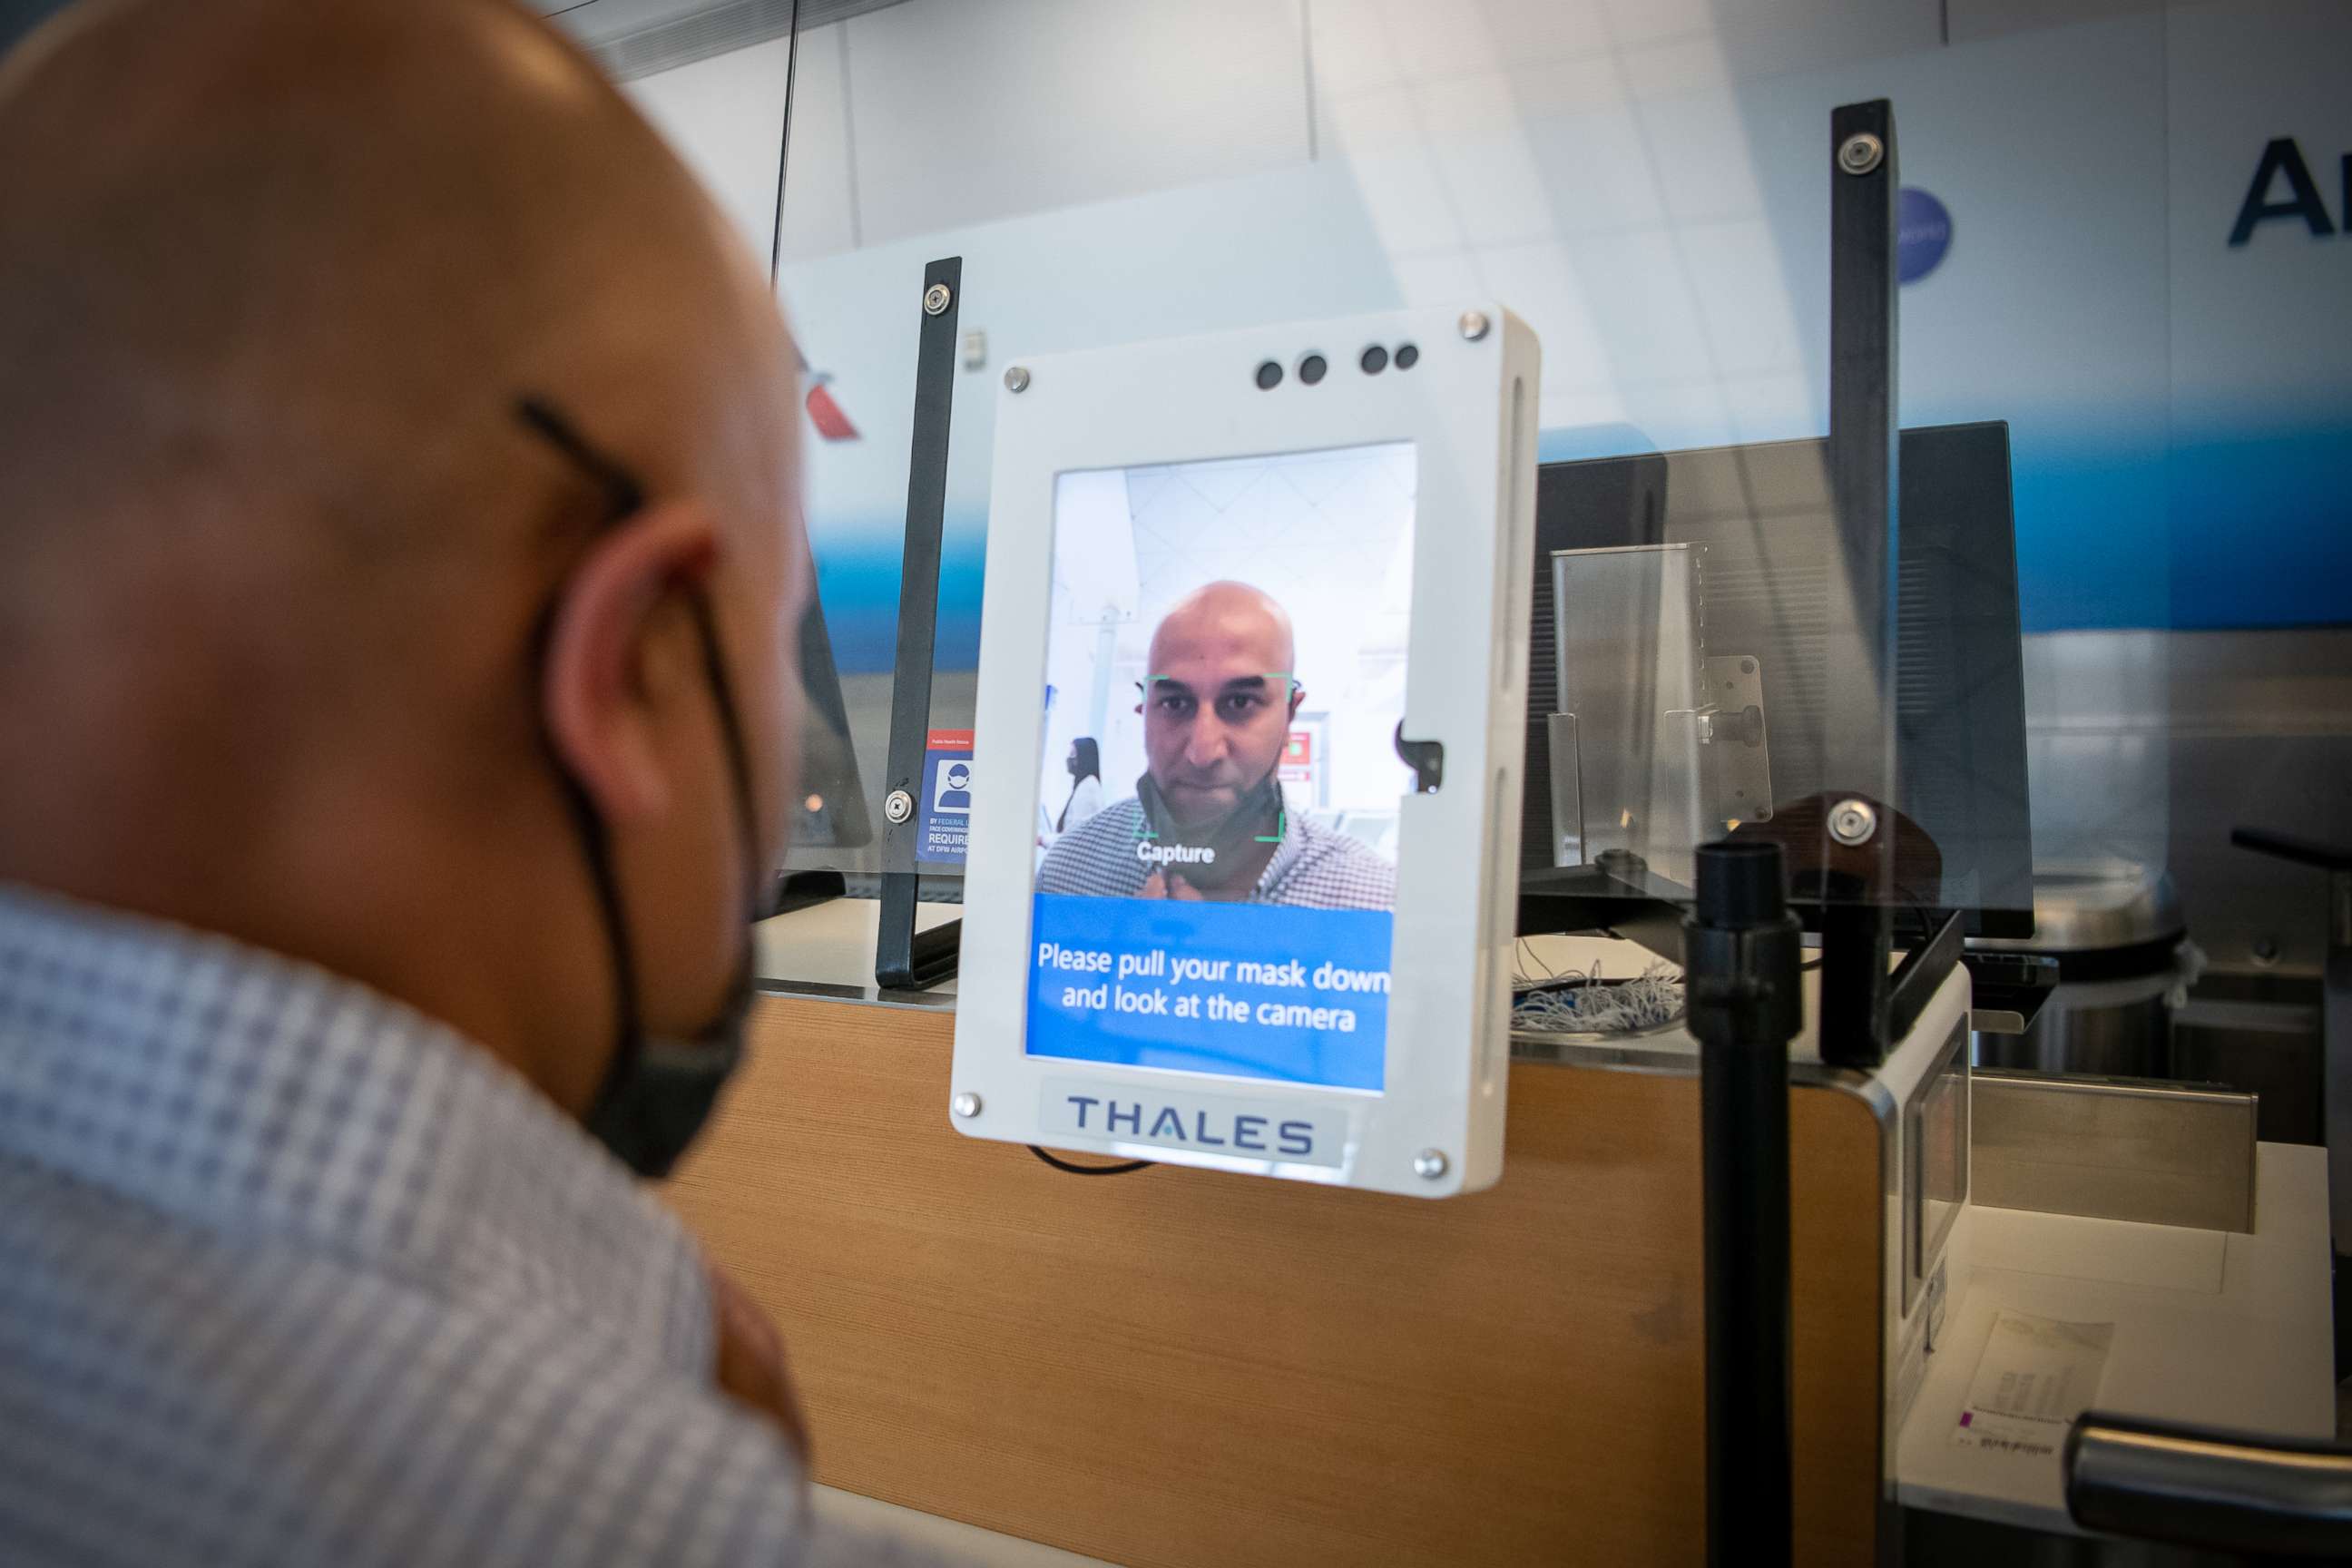 PHOTO: American Airlines is testing biometric boarding in light of COVID-19 concerns. It scans your face to confirm your identity without having to scan a boarding pass.